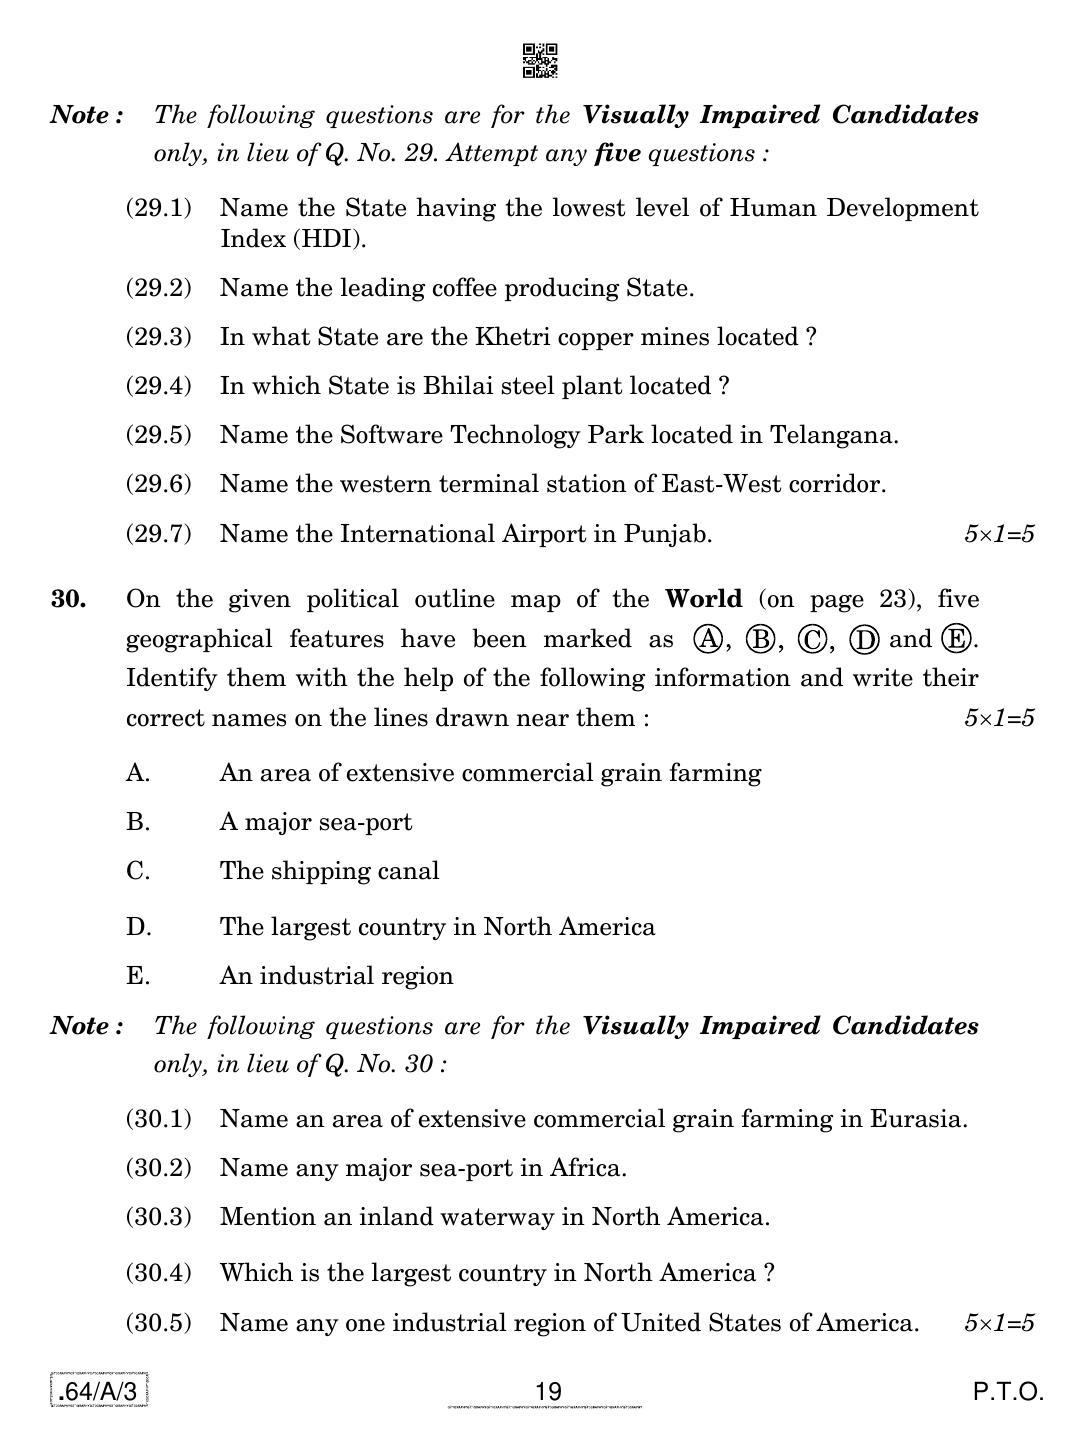 CBSE Class 12 64-C-3 - Geography 2020 Compartment Question Paper - Page 19